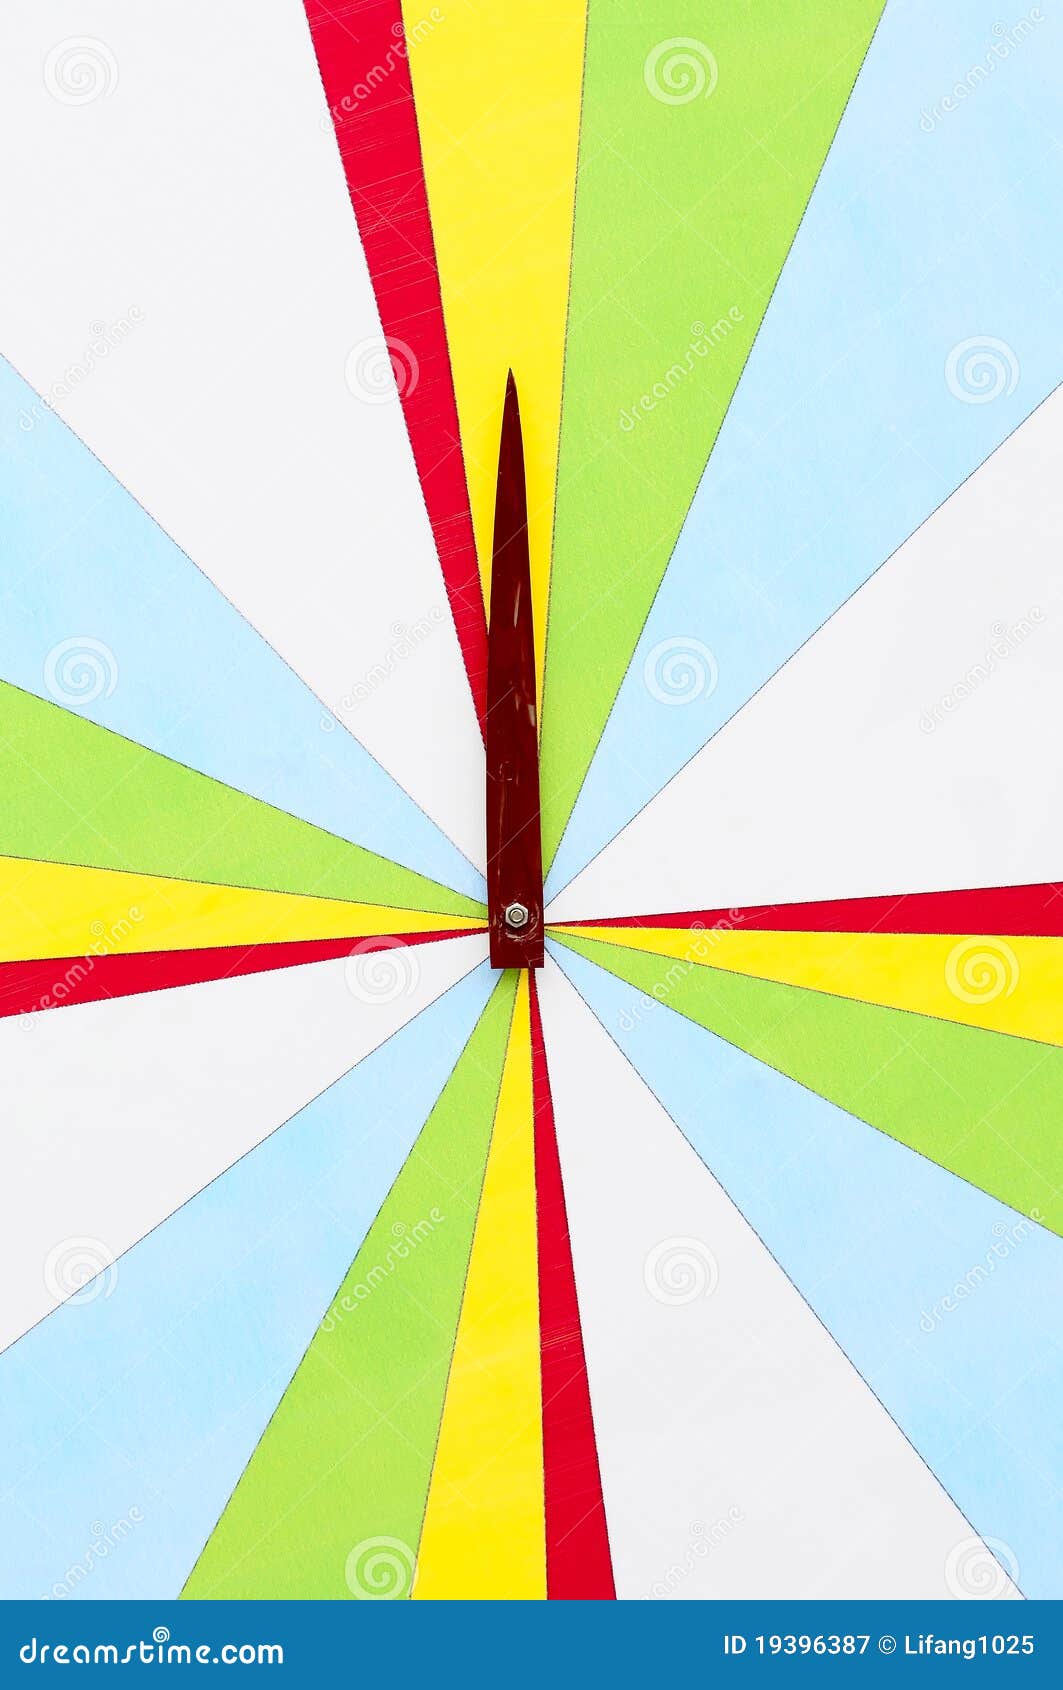 Color roulette stock image. Image of point, rewards, yellow - 19396387